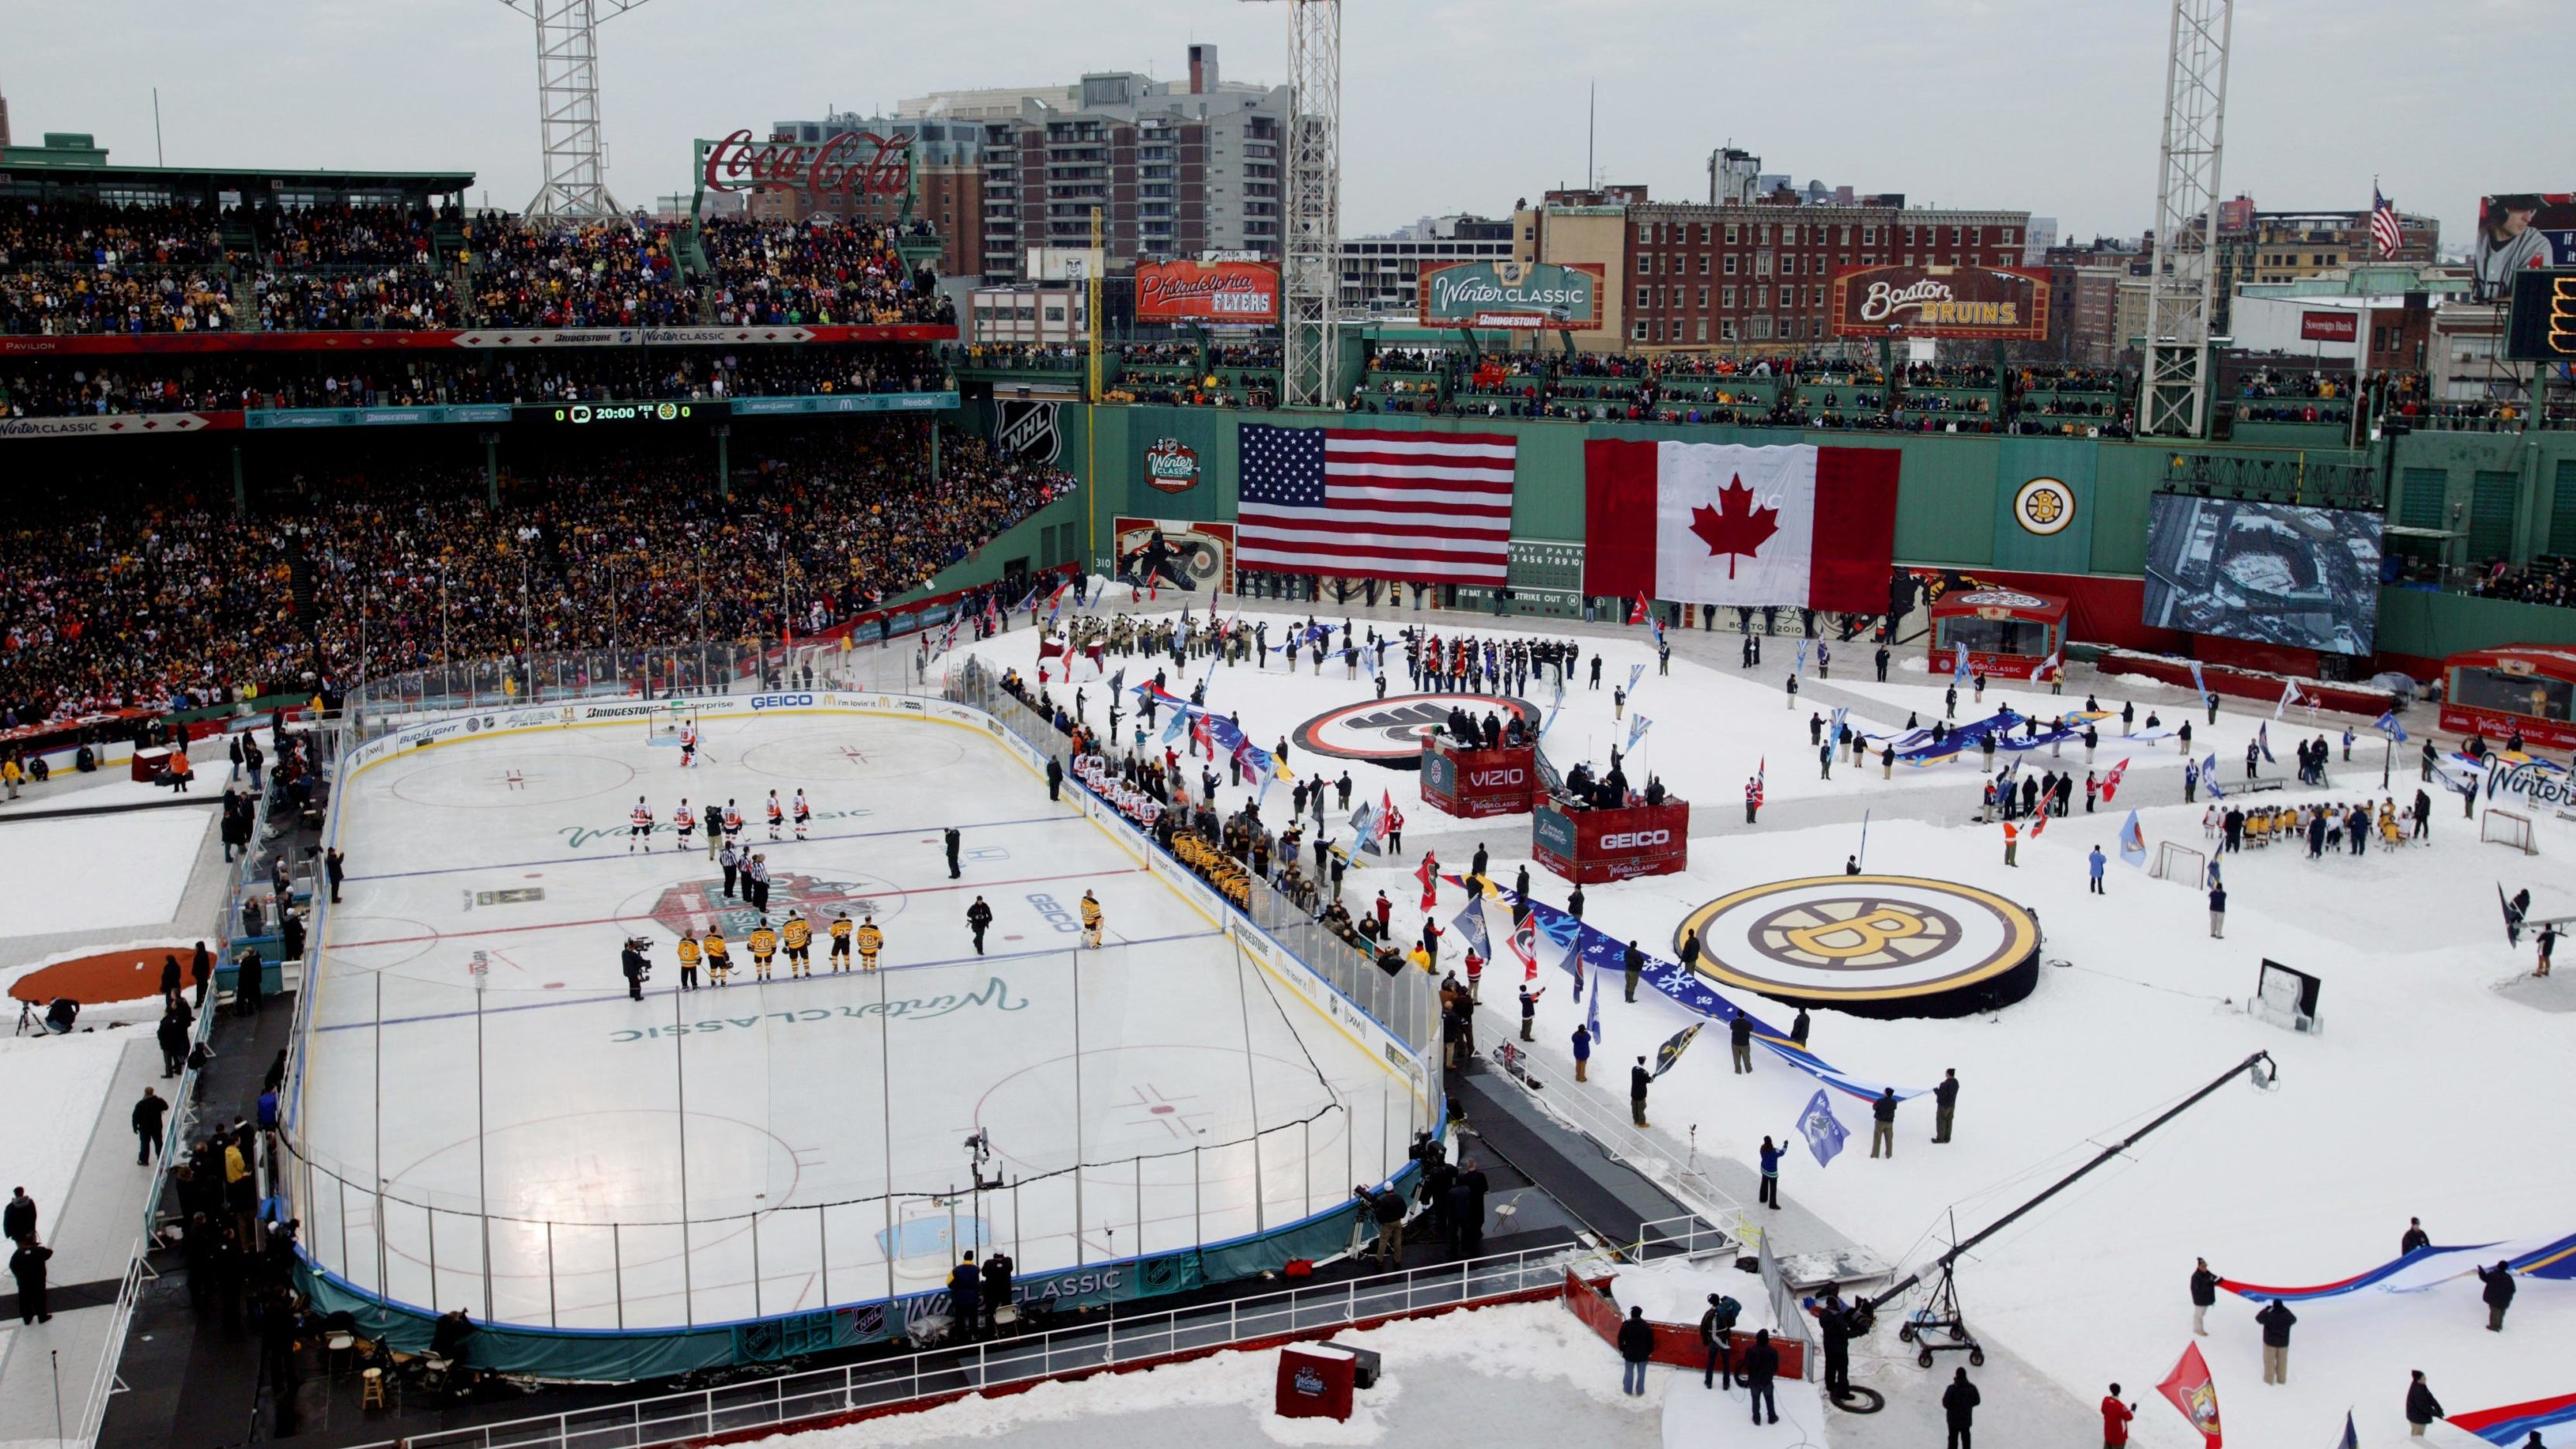 NHL announces Winter Classic returning to Fenway Park in 2023